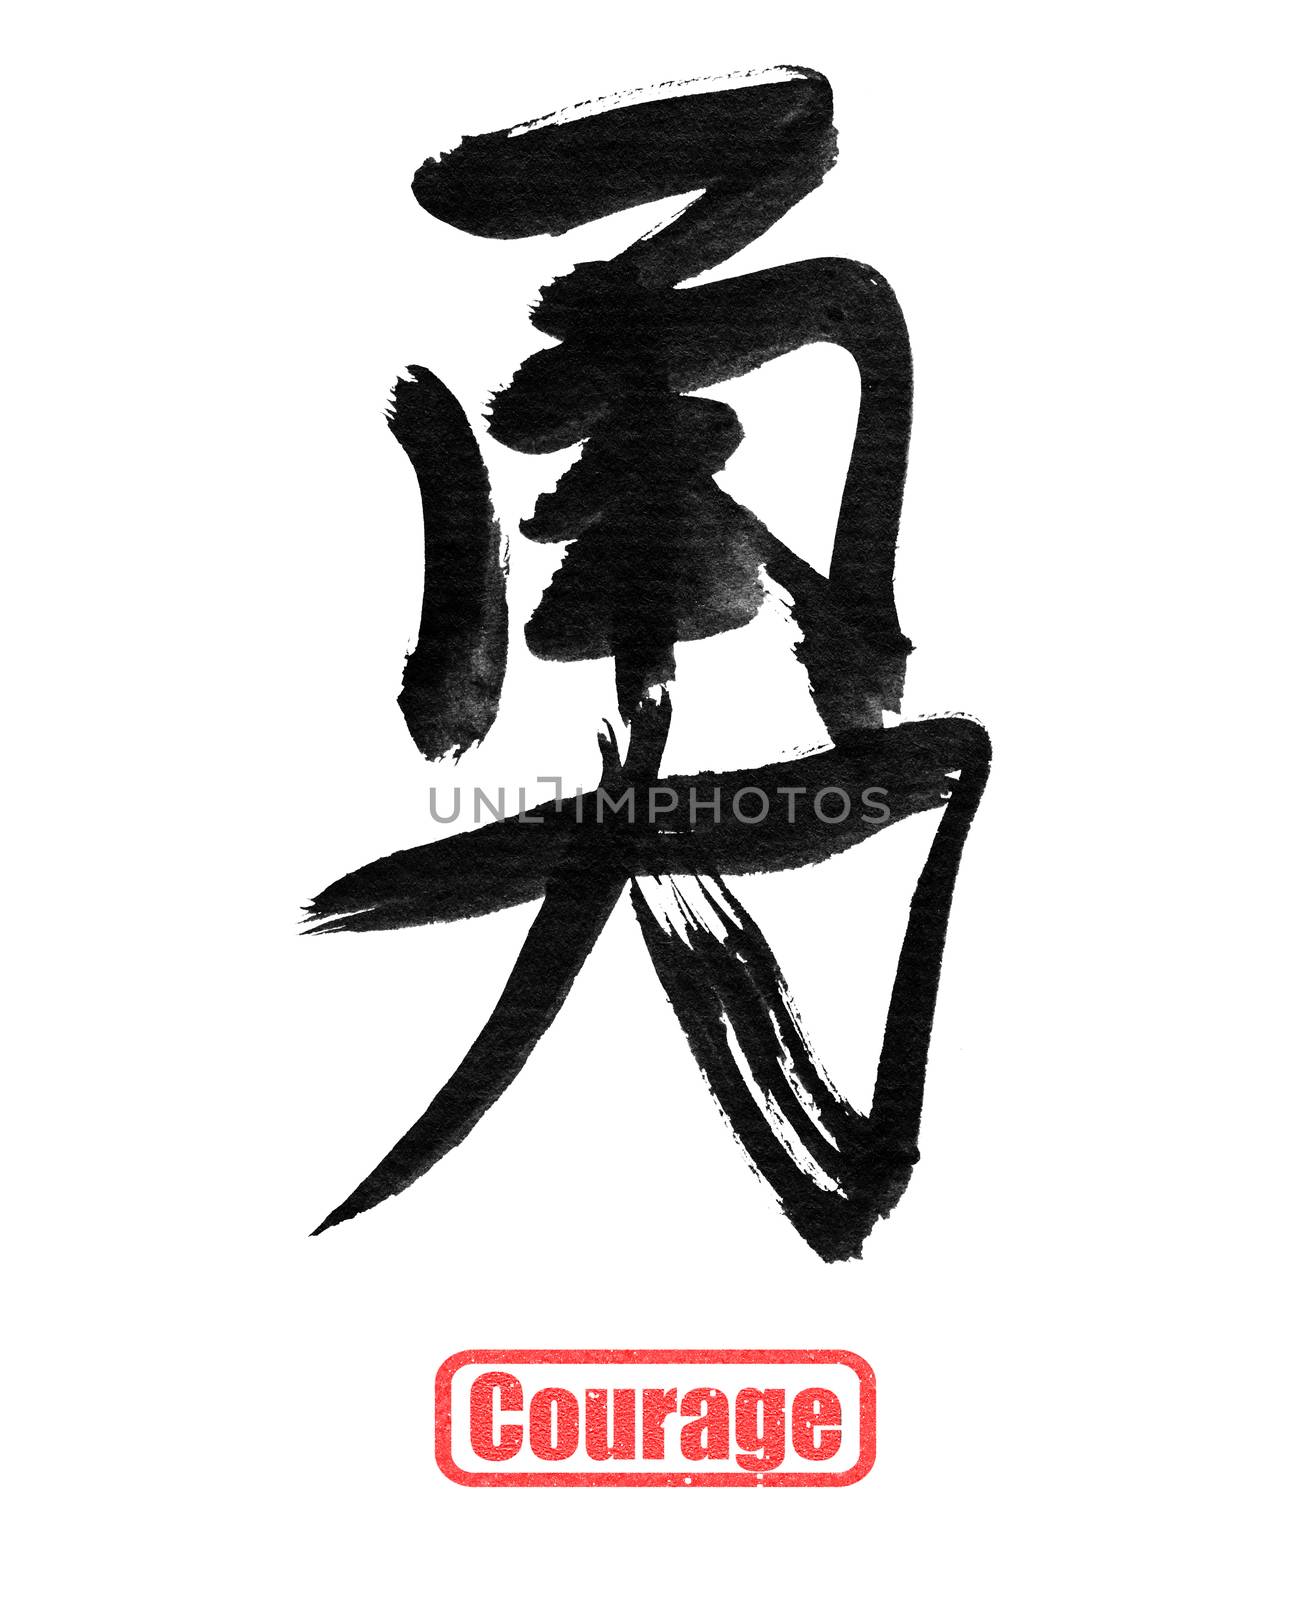 Courage, traditional chinese calligraphy art isolated on white background.